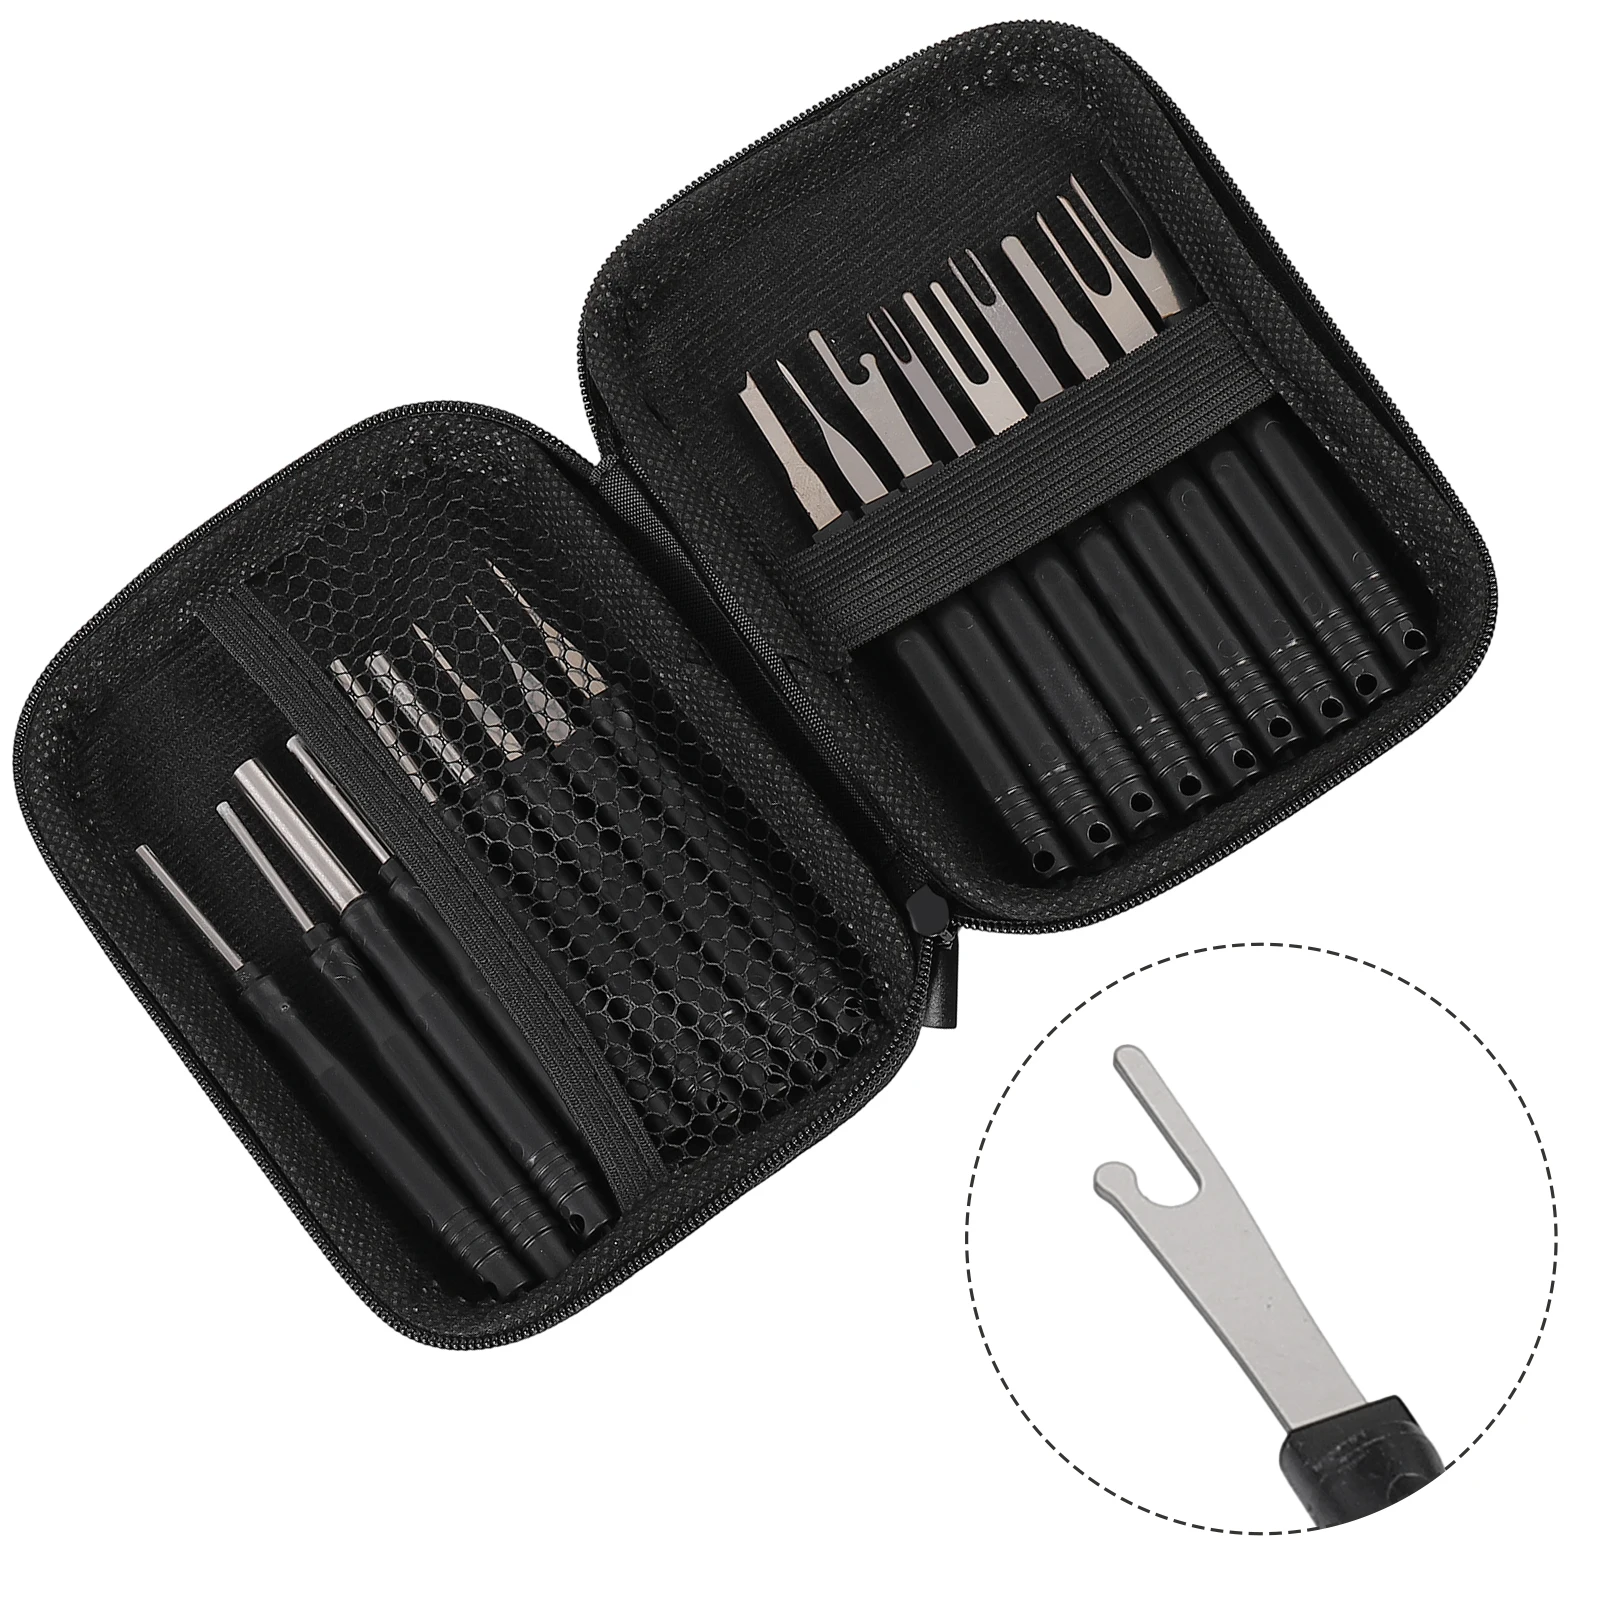 Auto Cable Plug Removal Tools With Box 1 Set Auto Accessory Pin Extractor Repair Removal Tools For Cars Wiring Harness Brand New